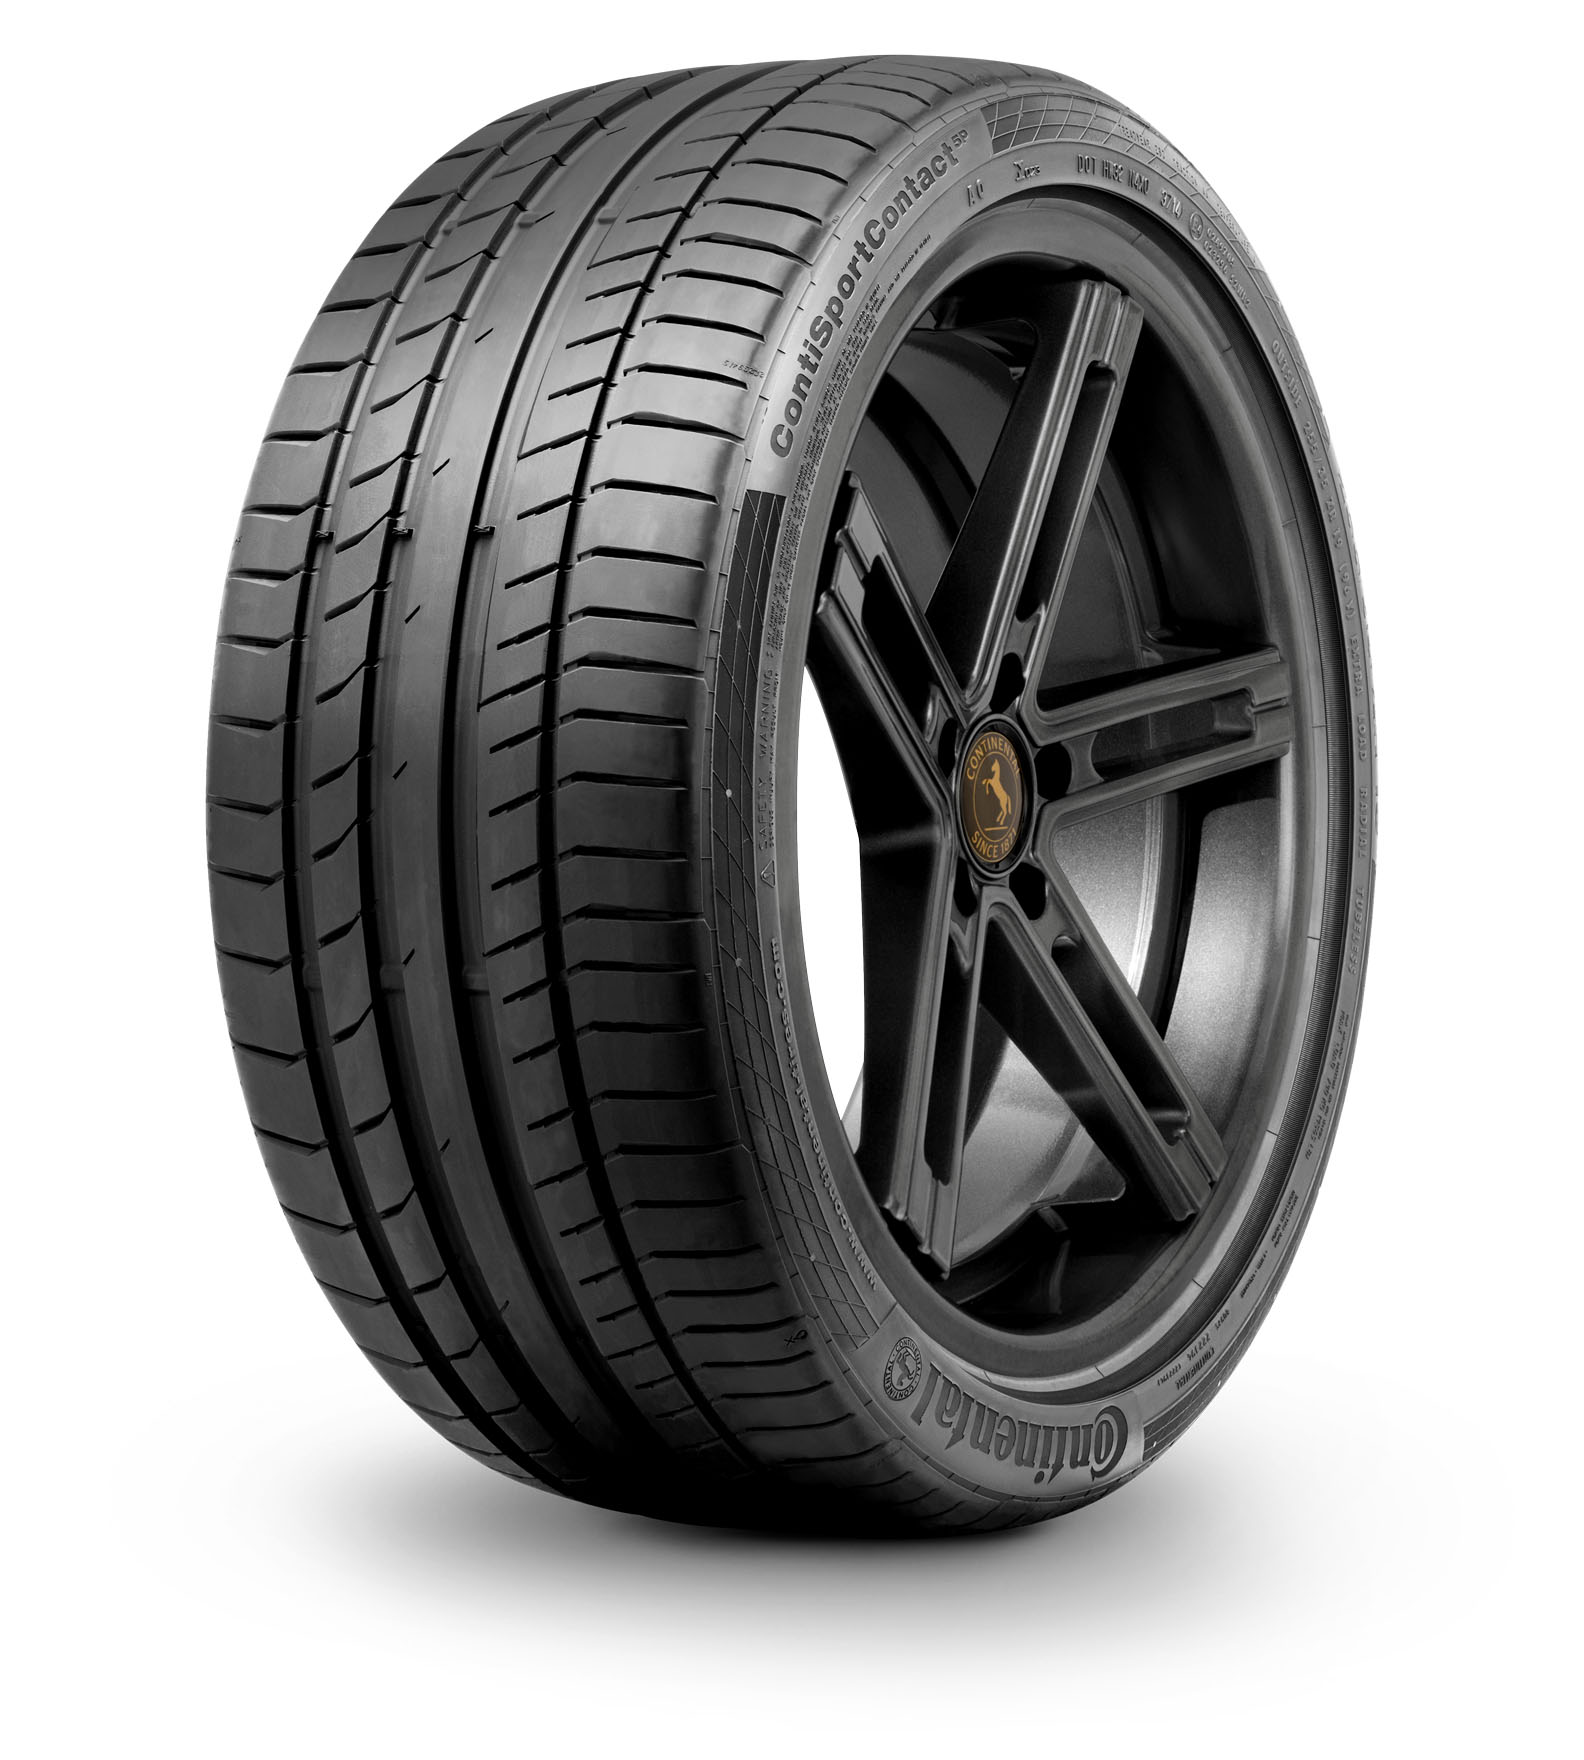 Continental 295/35R20 105Y ContiSportContact™ 5 P N0 DOT21